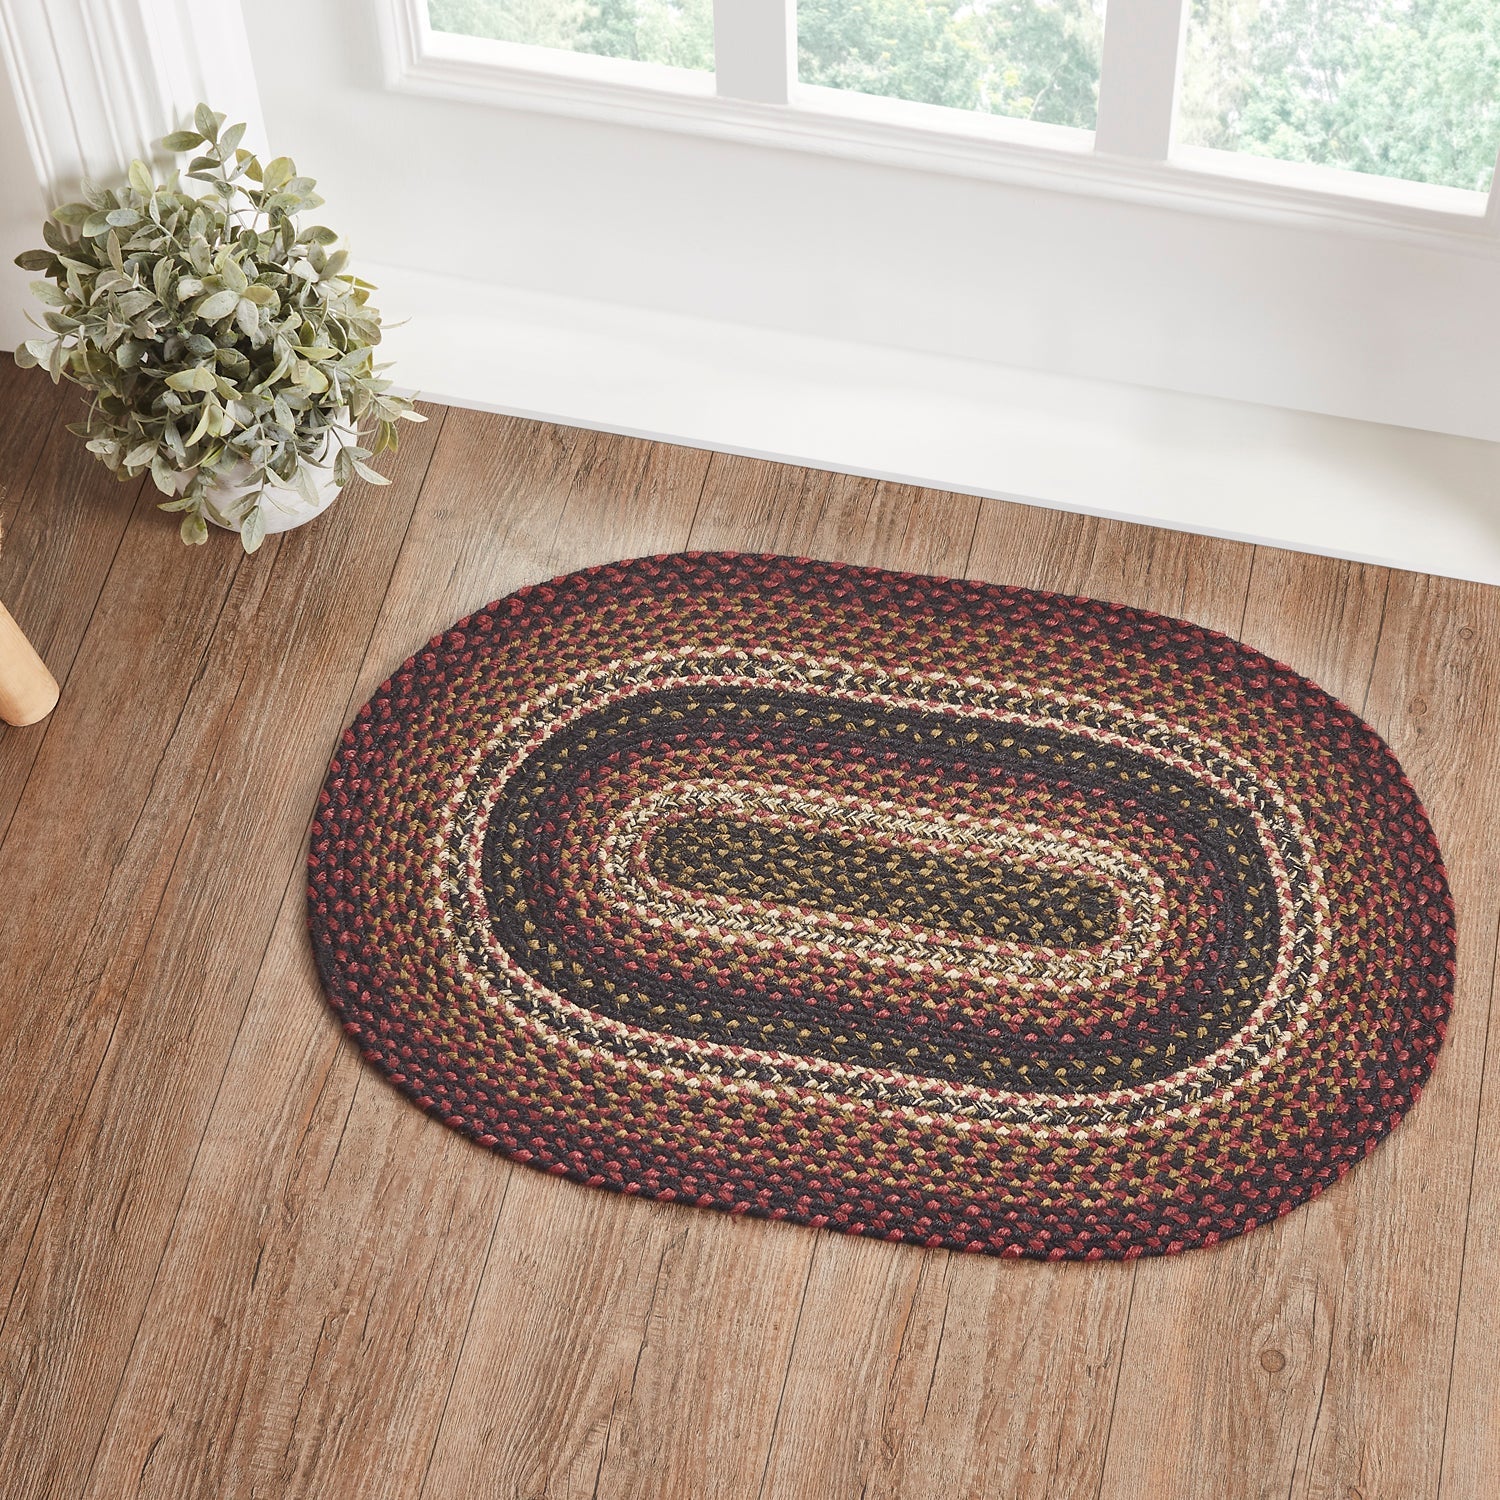 Beckham Jute Braided Rug Oval with Rug Pad 20"x30" VHC Brands